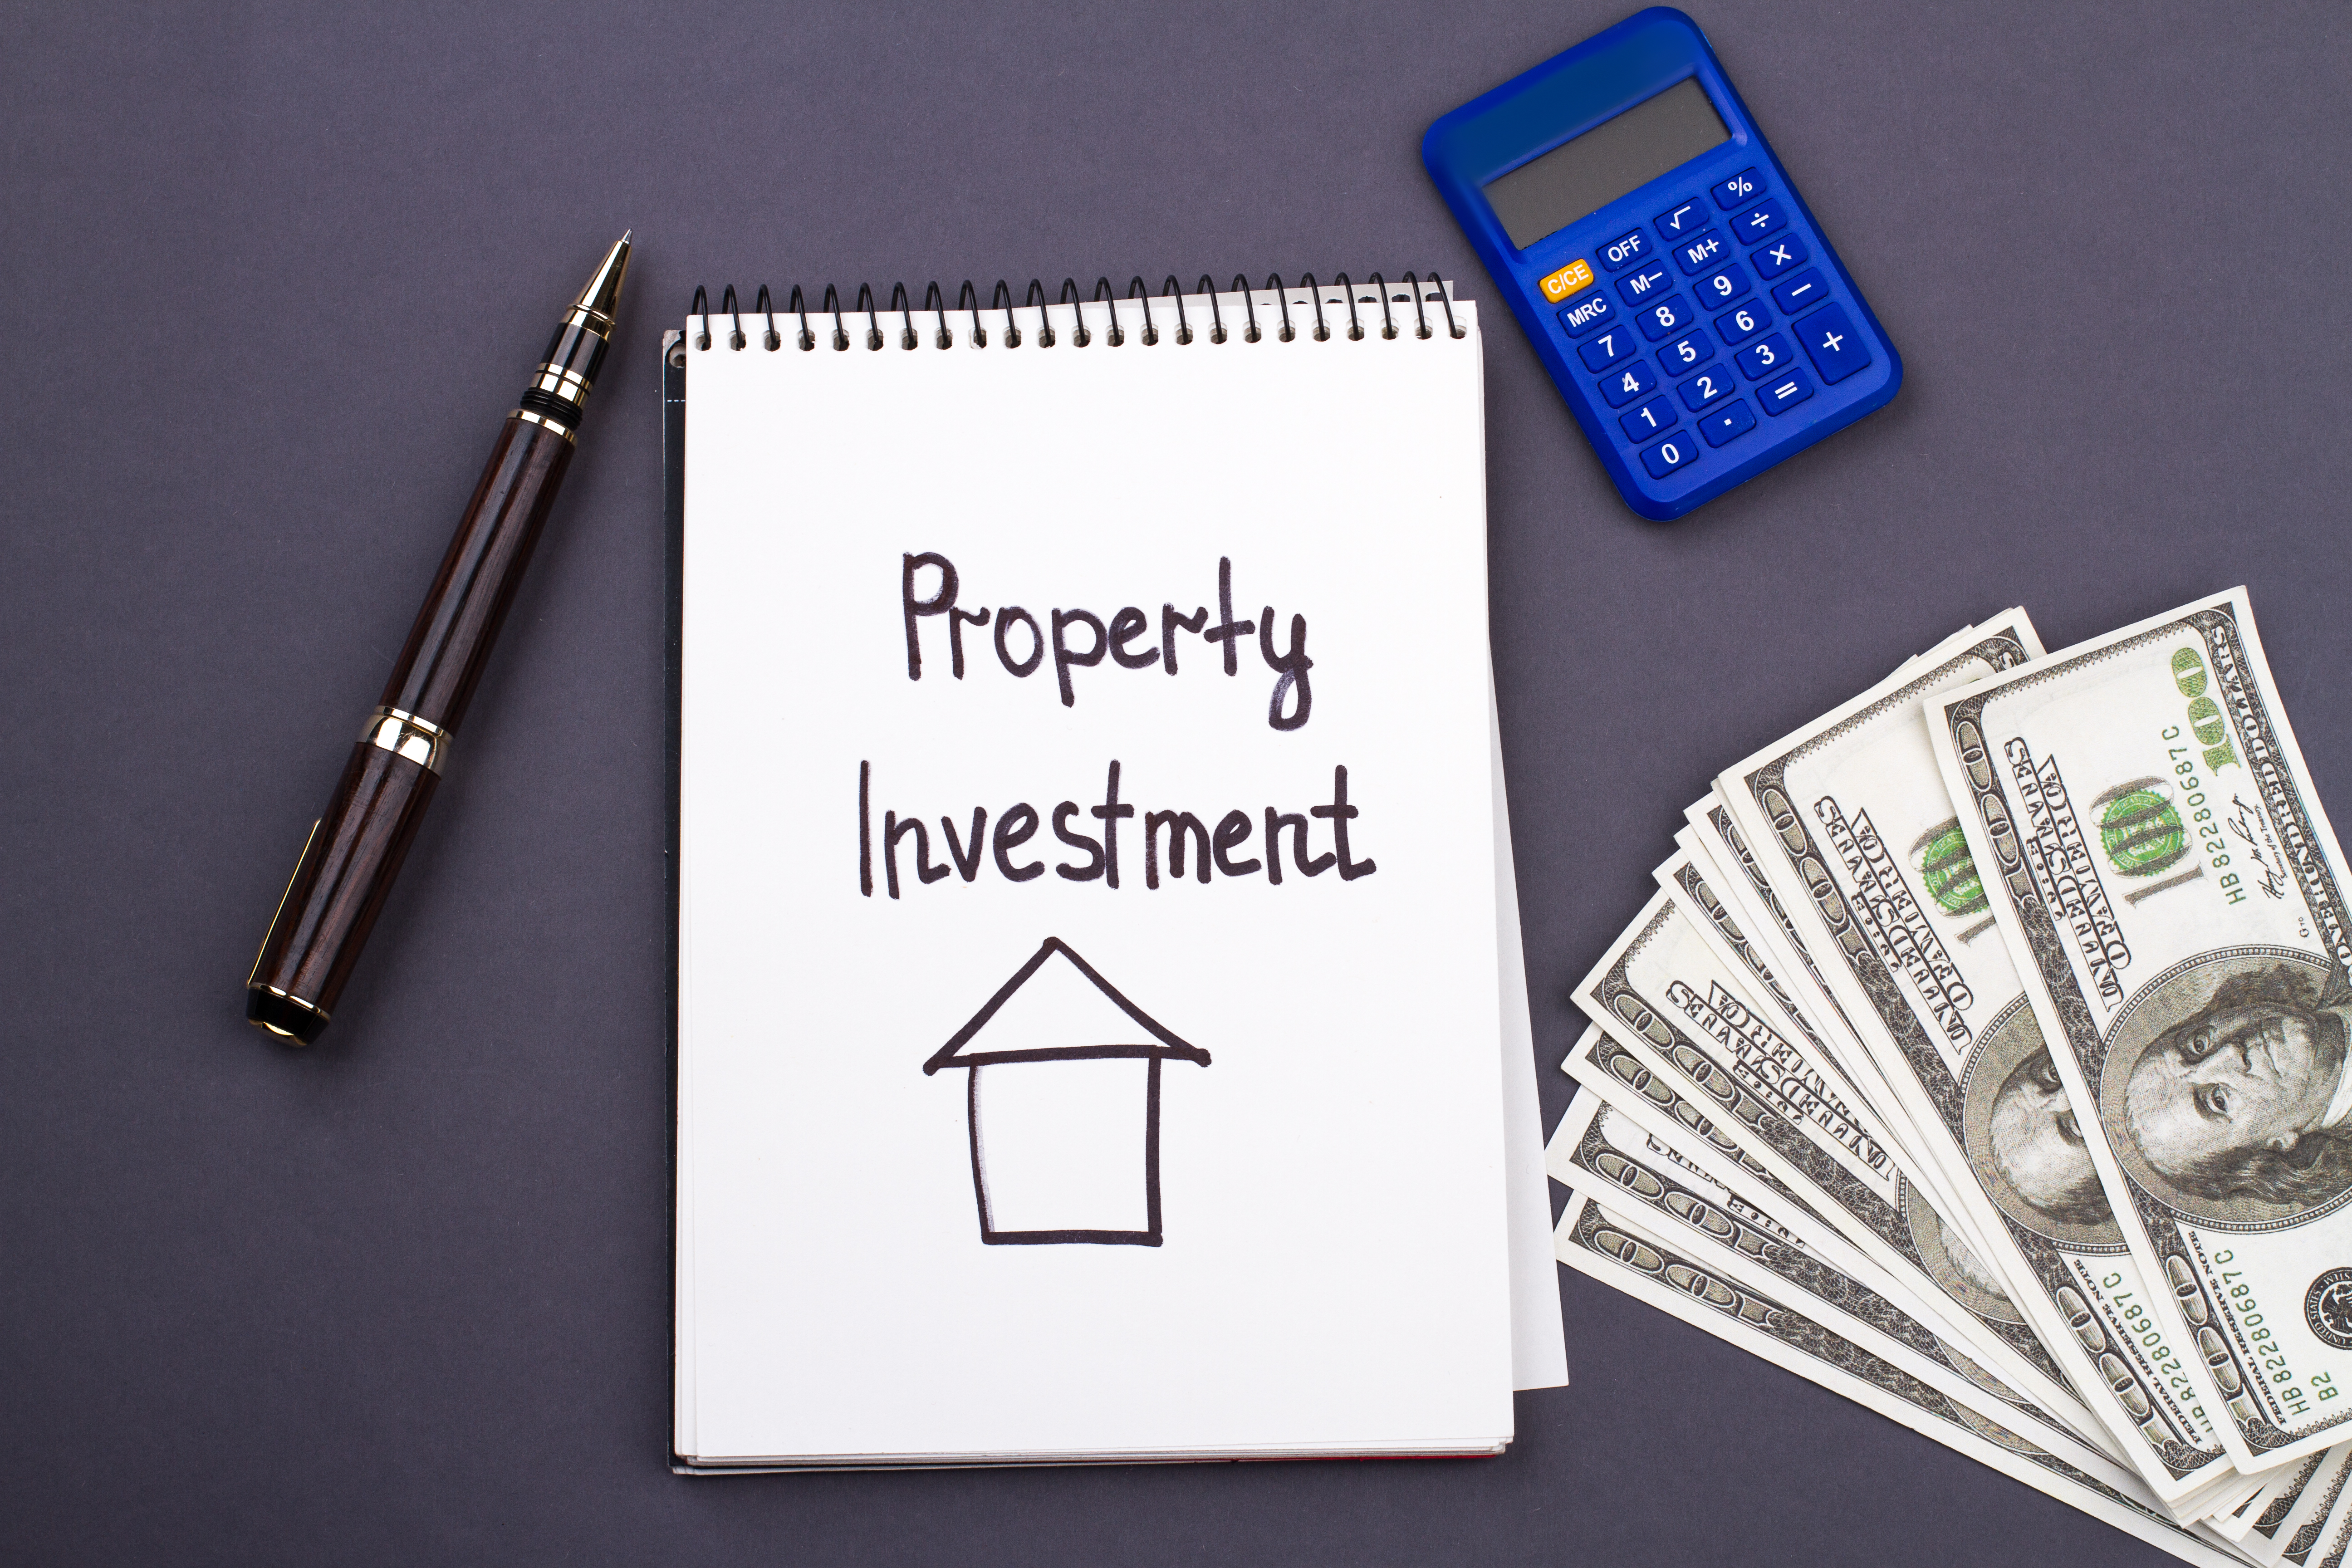 property-and-investment-concept-2022-01-08-05-21-39-utc.jpg